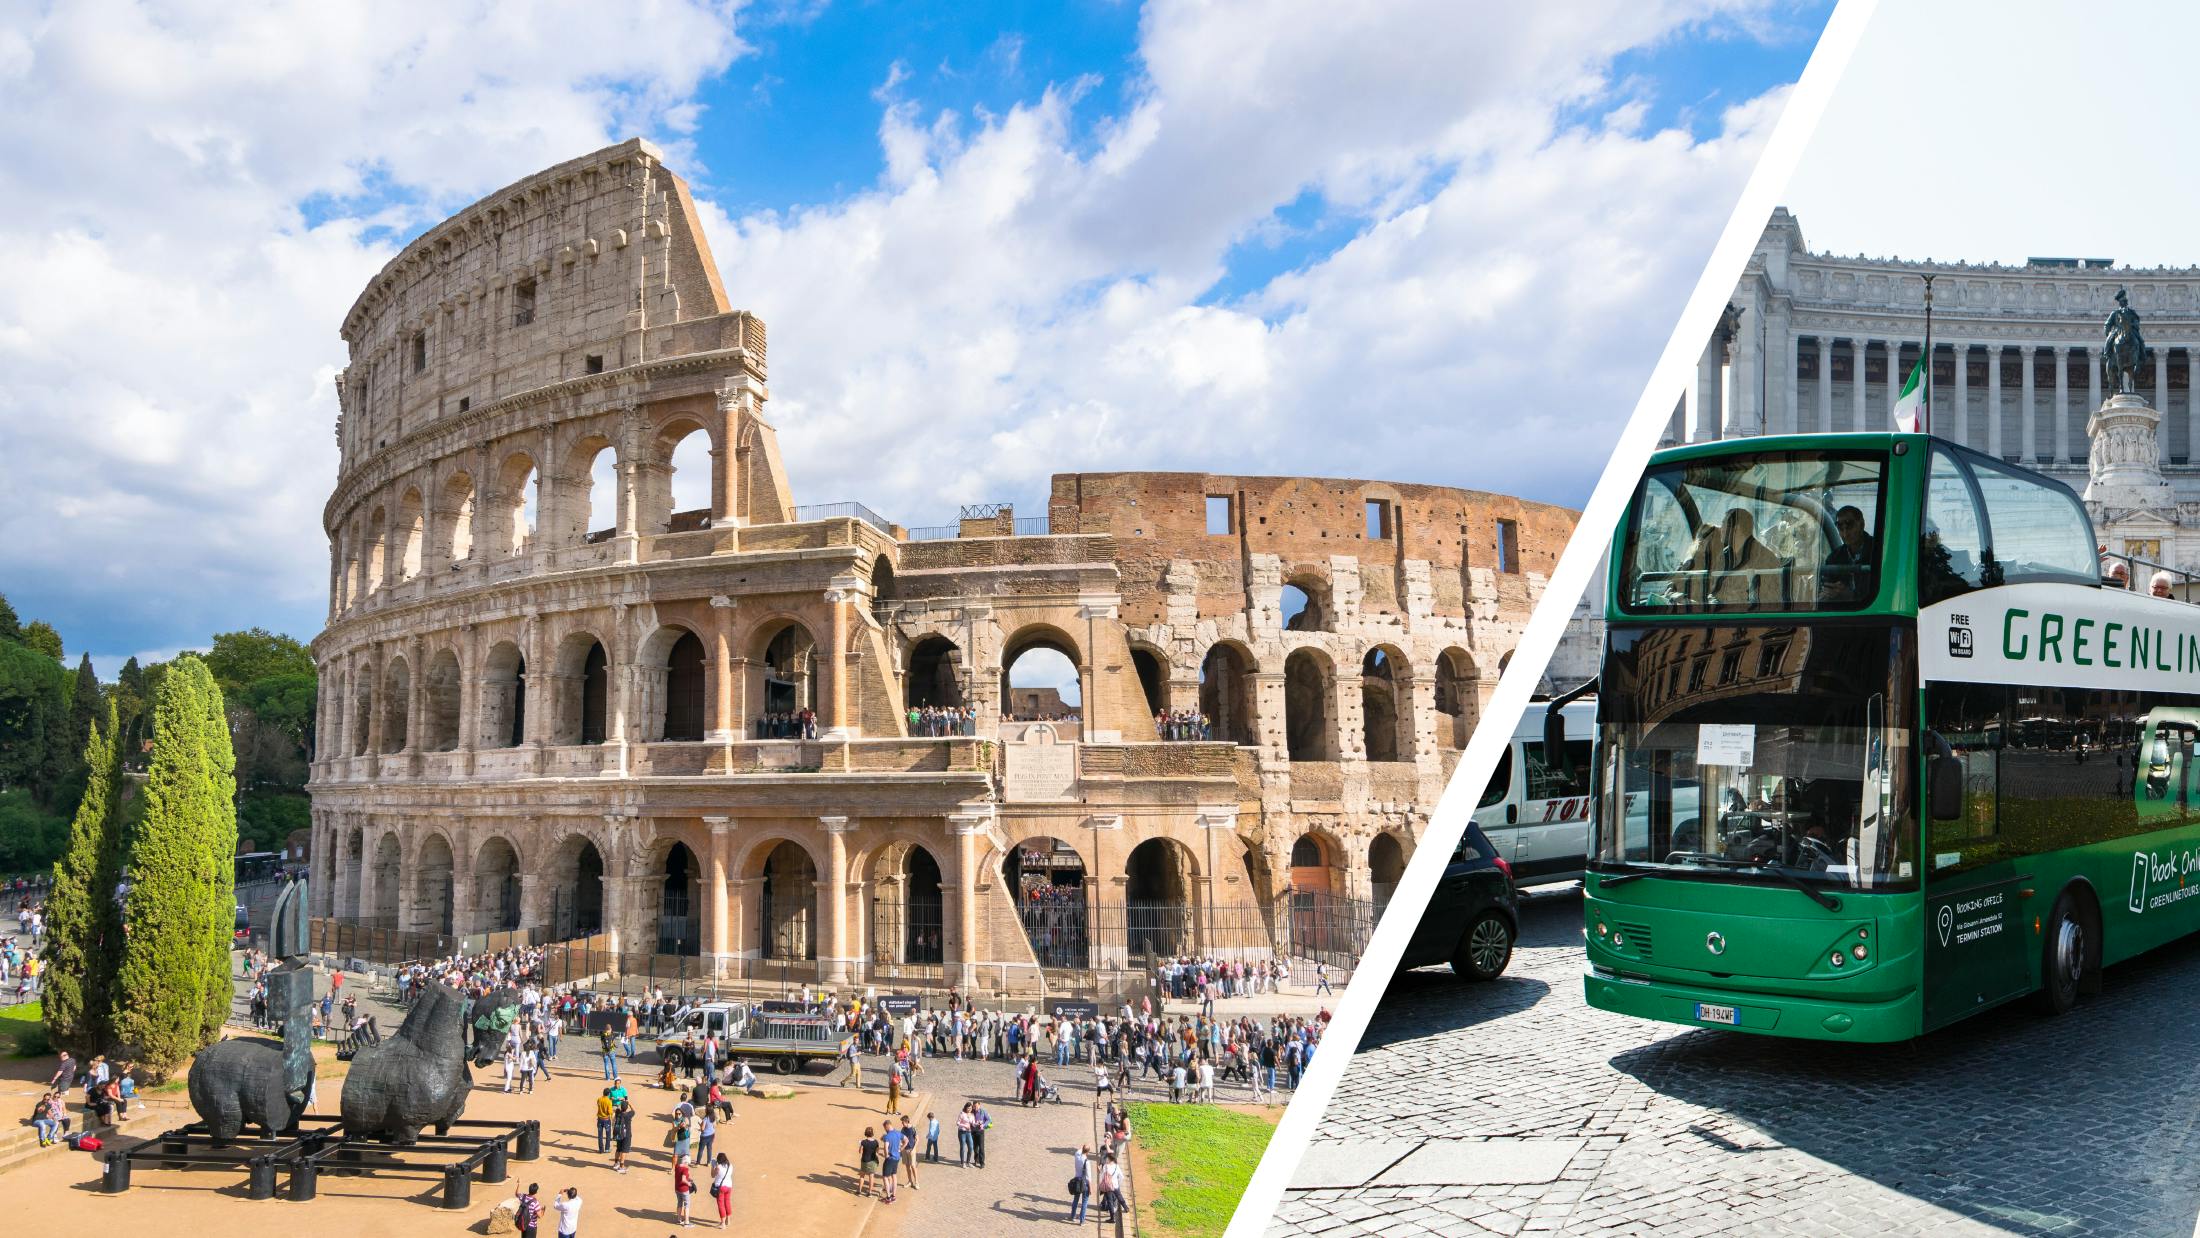 Colosseum, Roman Forum & Palatine Hill: Reserved Entry + Sightseeing Bus Tour